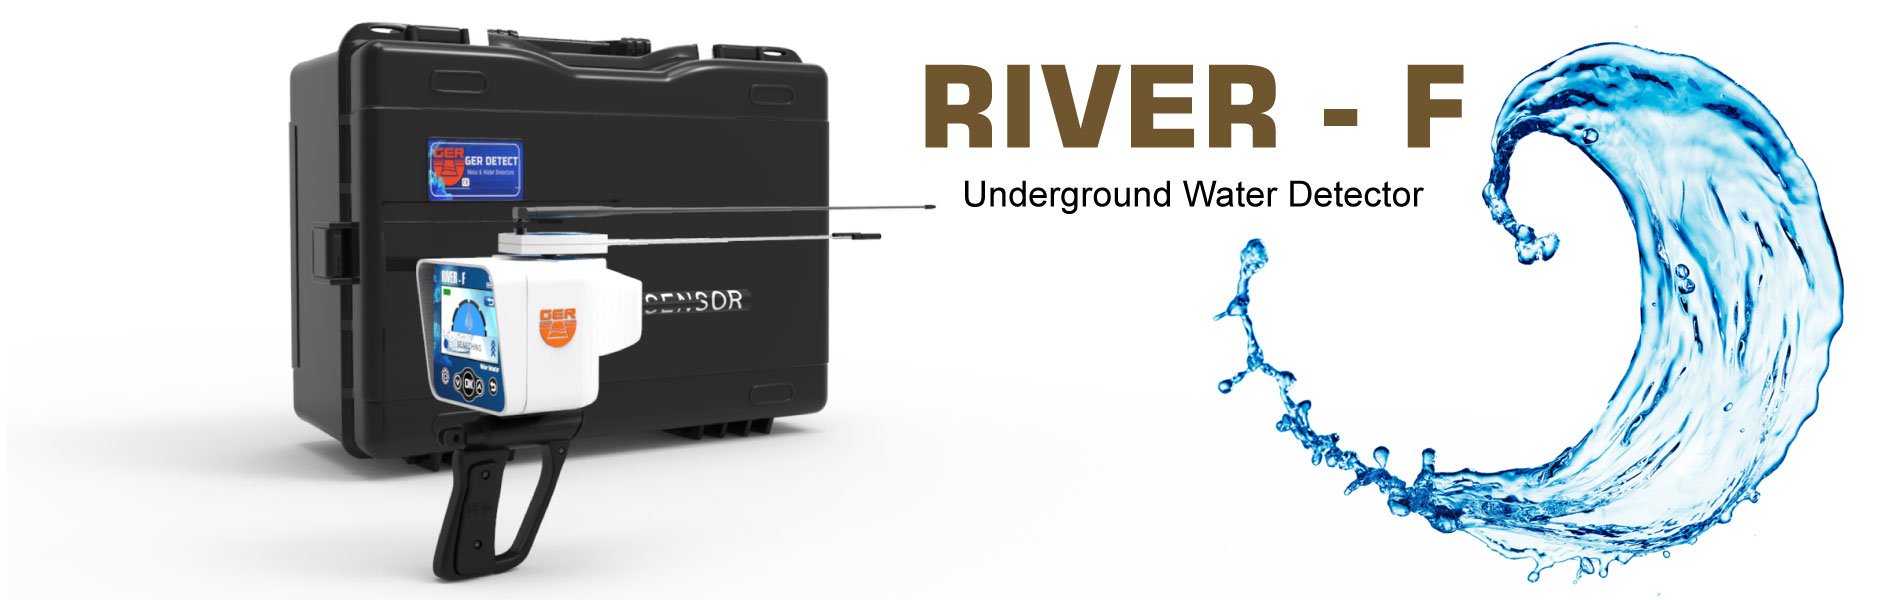 river-f-best-device-detect-groundwater